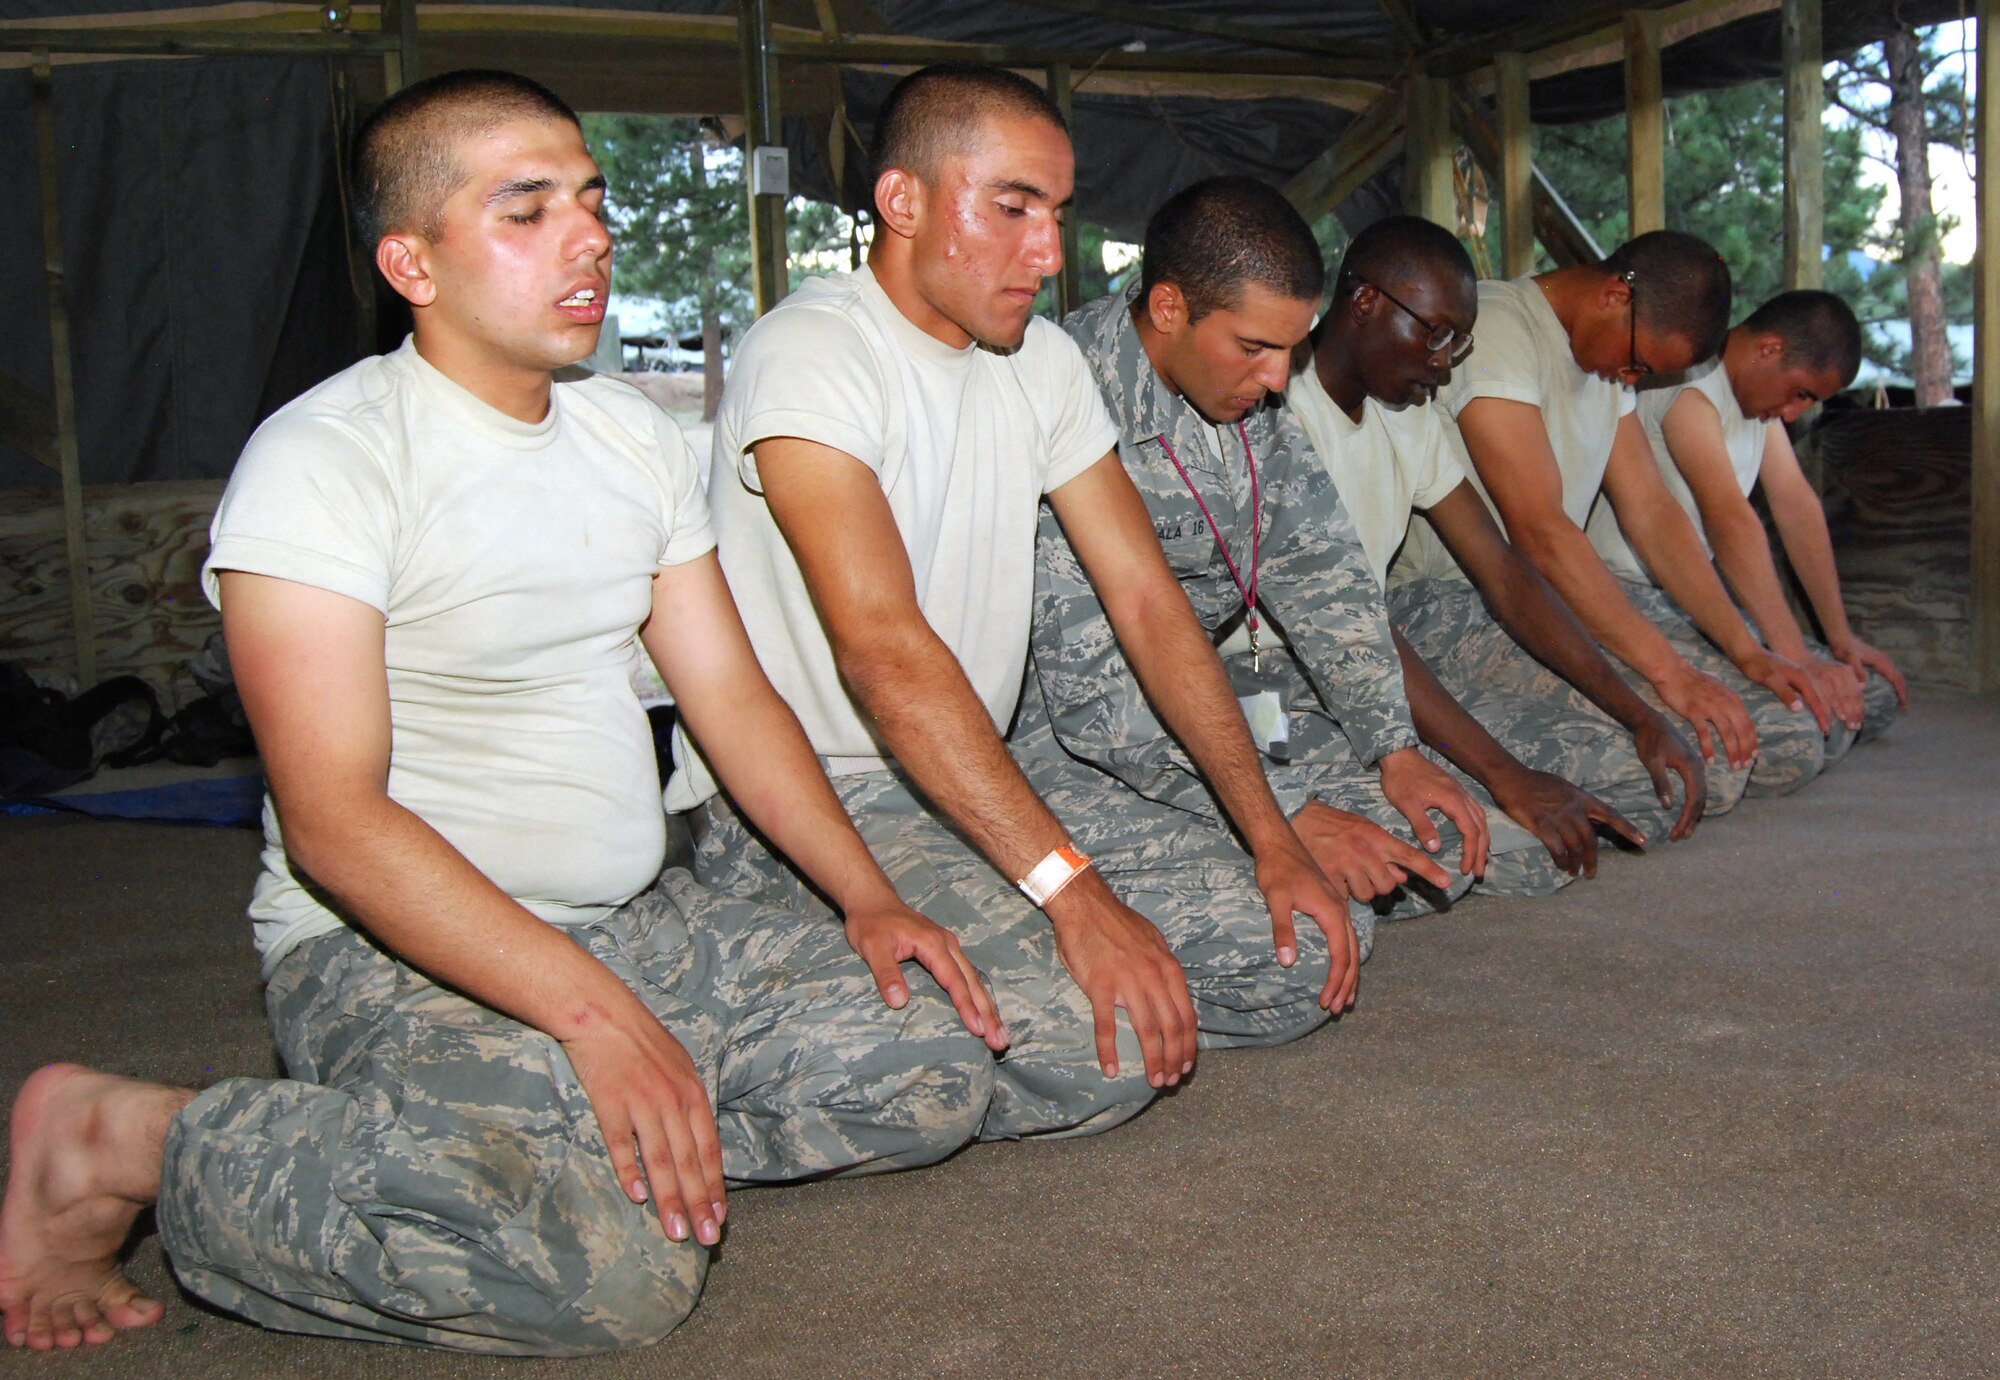 Basic cadets kneel during maghrib, or sunset prayers, in Jacks Valley's Muslim chapel July 22, 2012. Islam typically requires five daily prayers, to be done before sunrise, at noon, in the mid-afternoon, just after sunset and before going to bed for the evening. (U.S. Air Force photo/Don Branum)